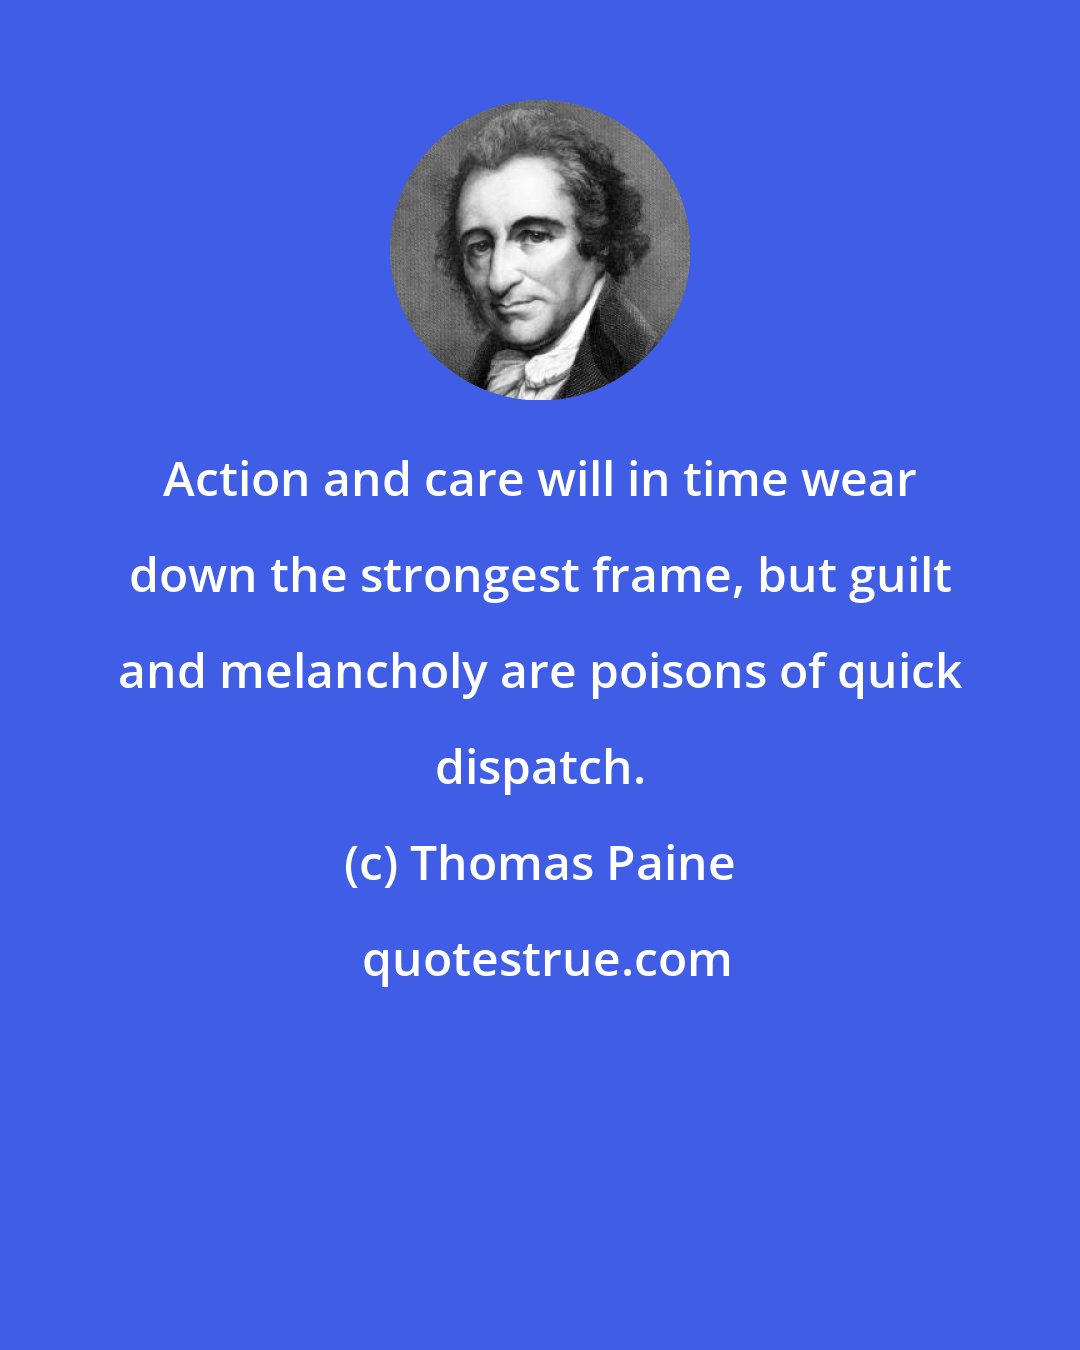 Thomas Paine: Action and care will in time wear down the strongest frame, but guilt and melancholy are poisons of quick dispatch.